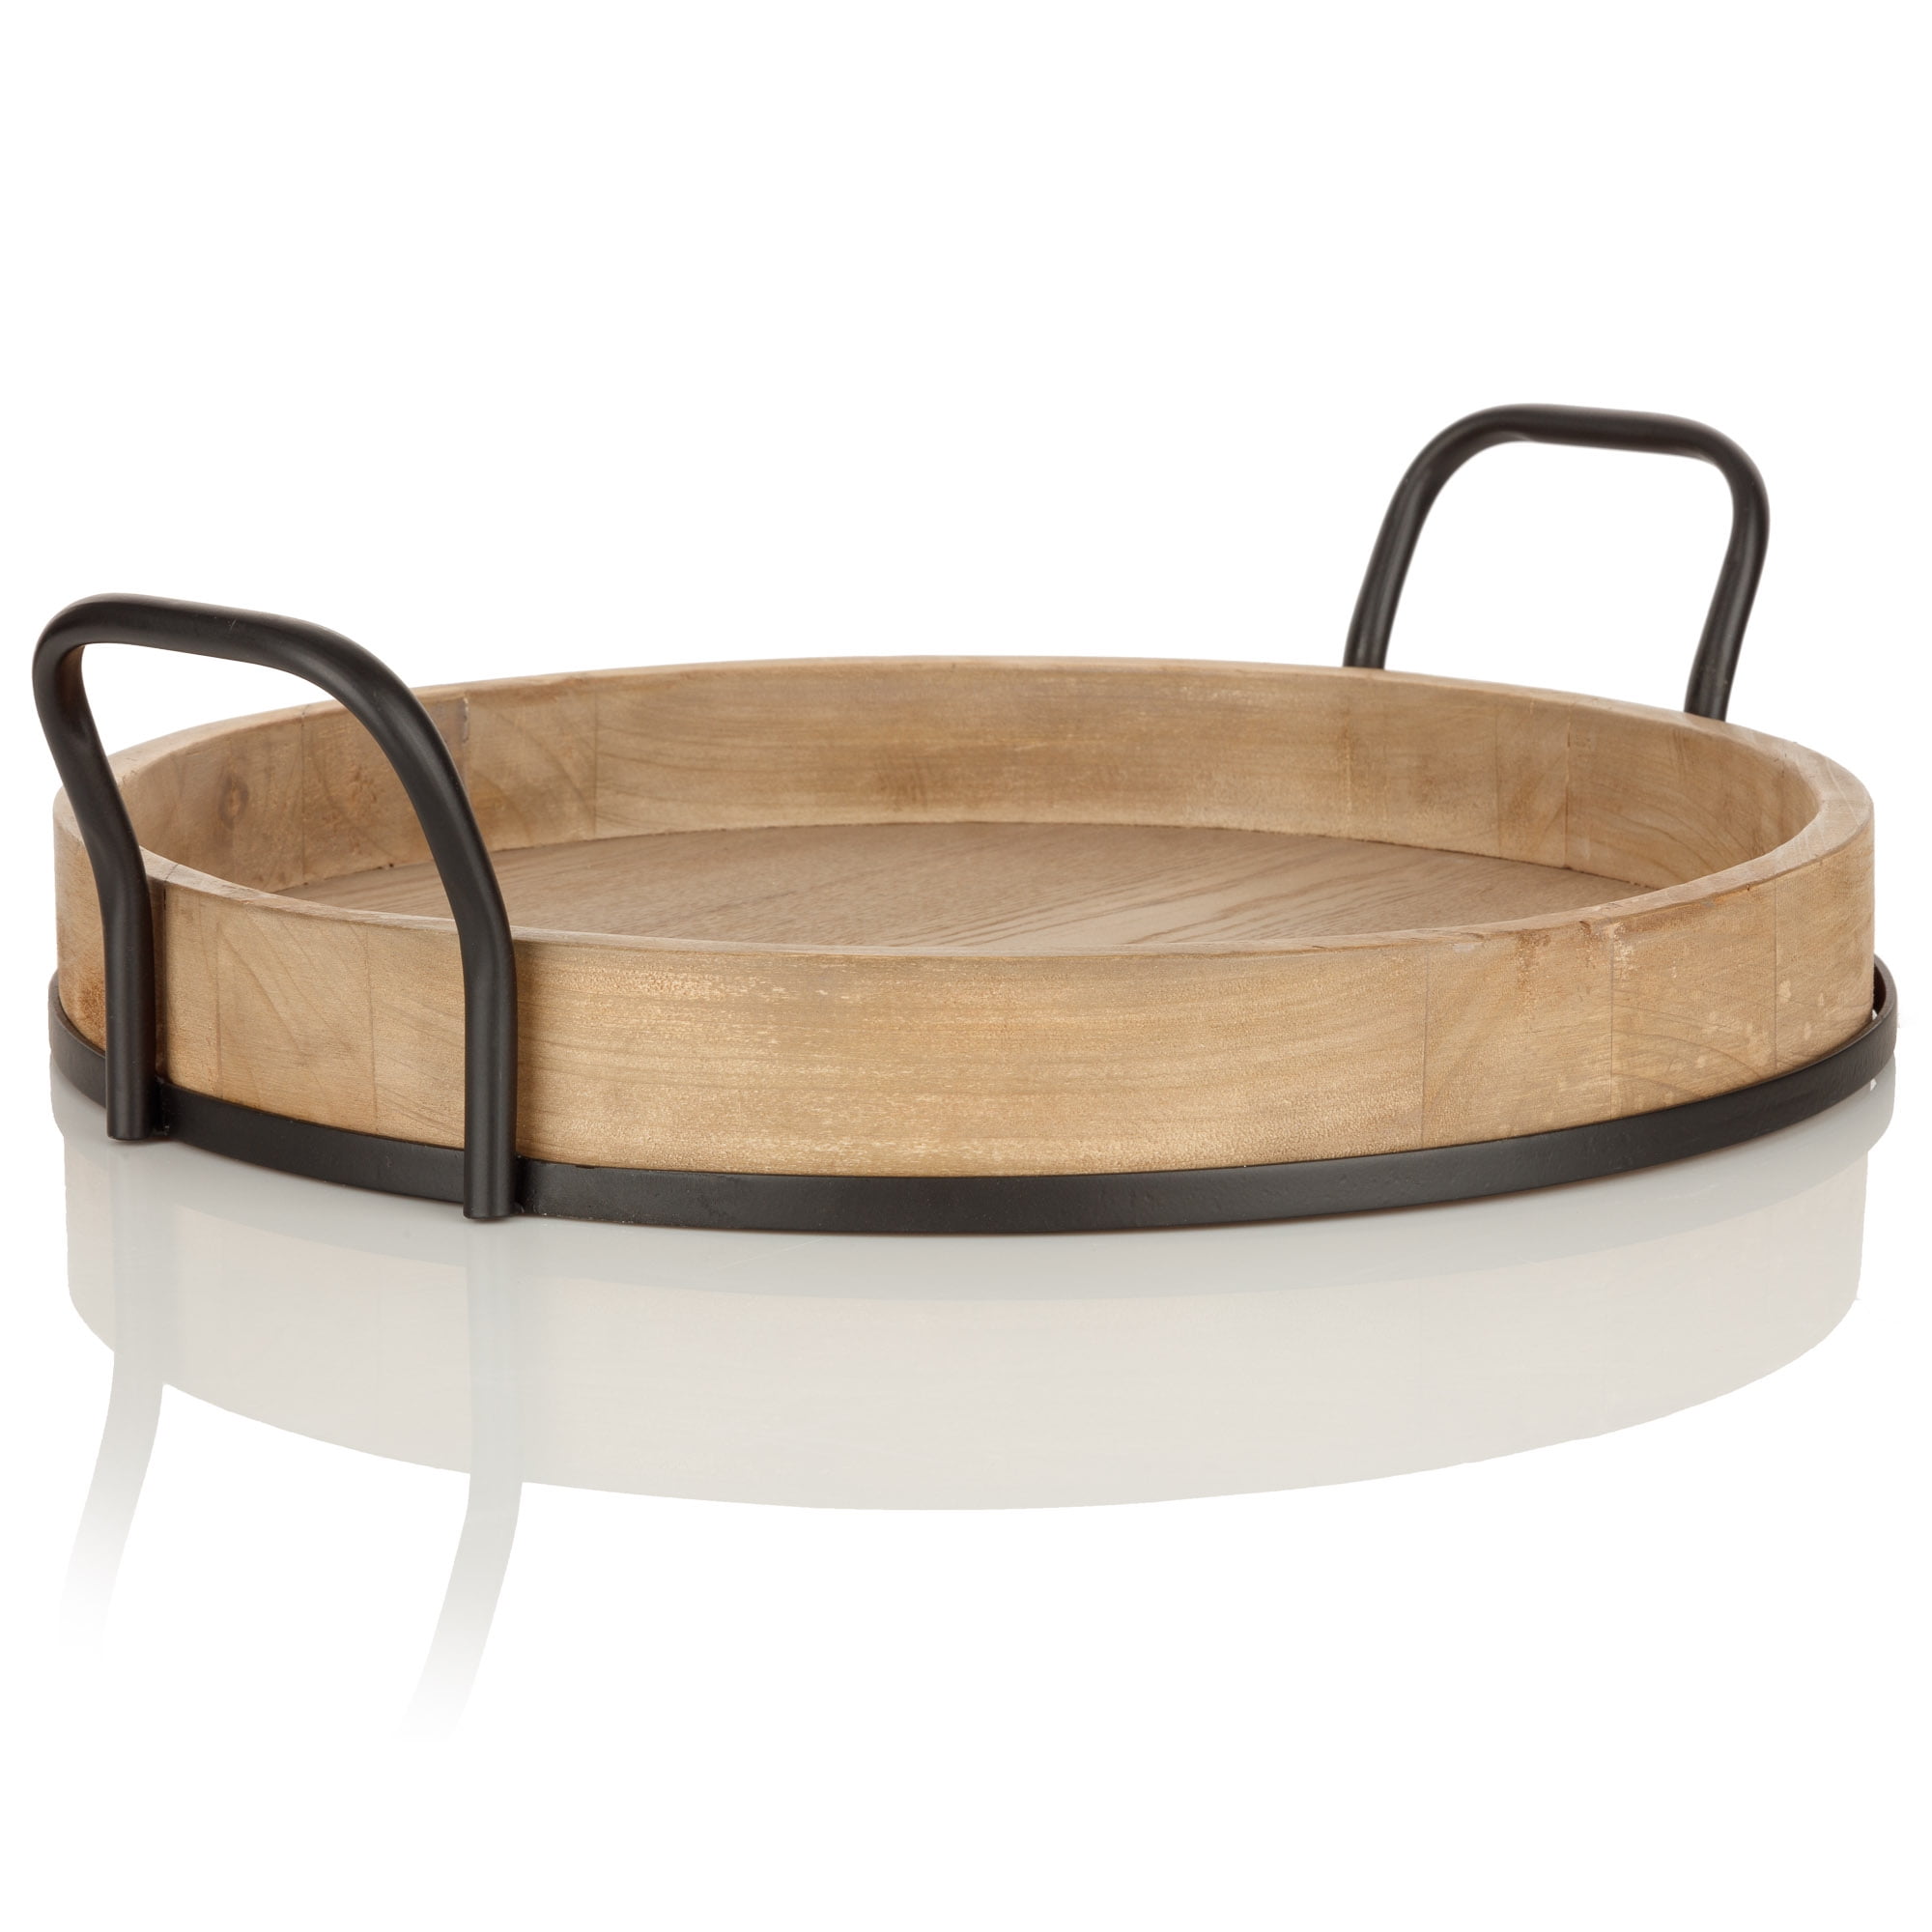 Round Rustic Brown Wood Serving Tray, Round Wood Tray With Metal Handles